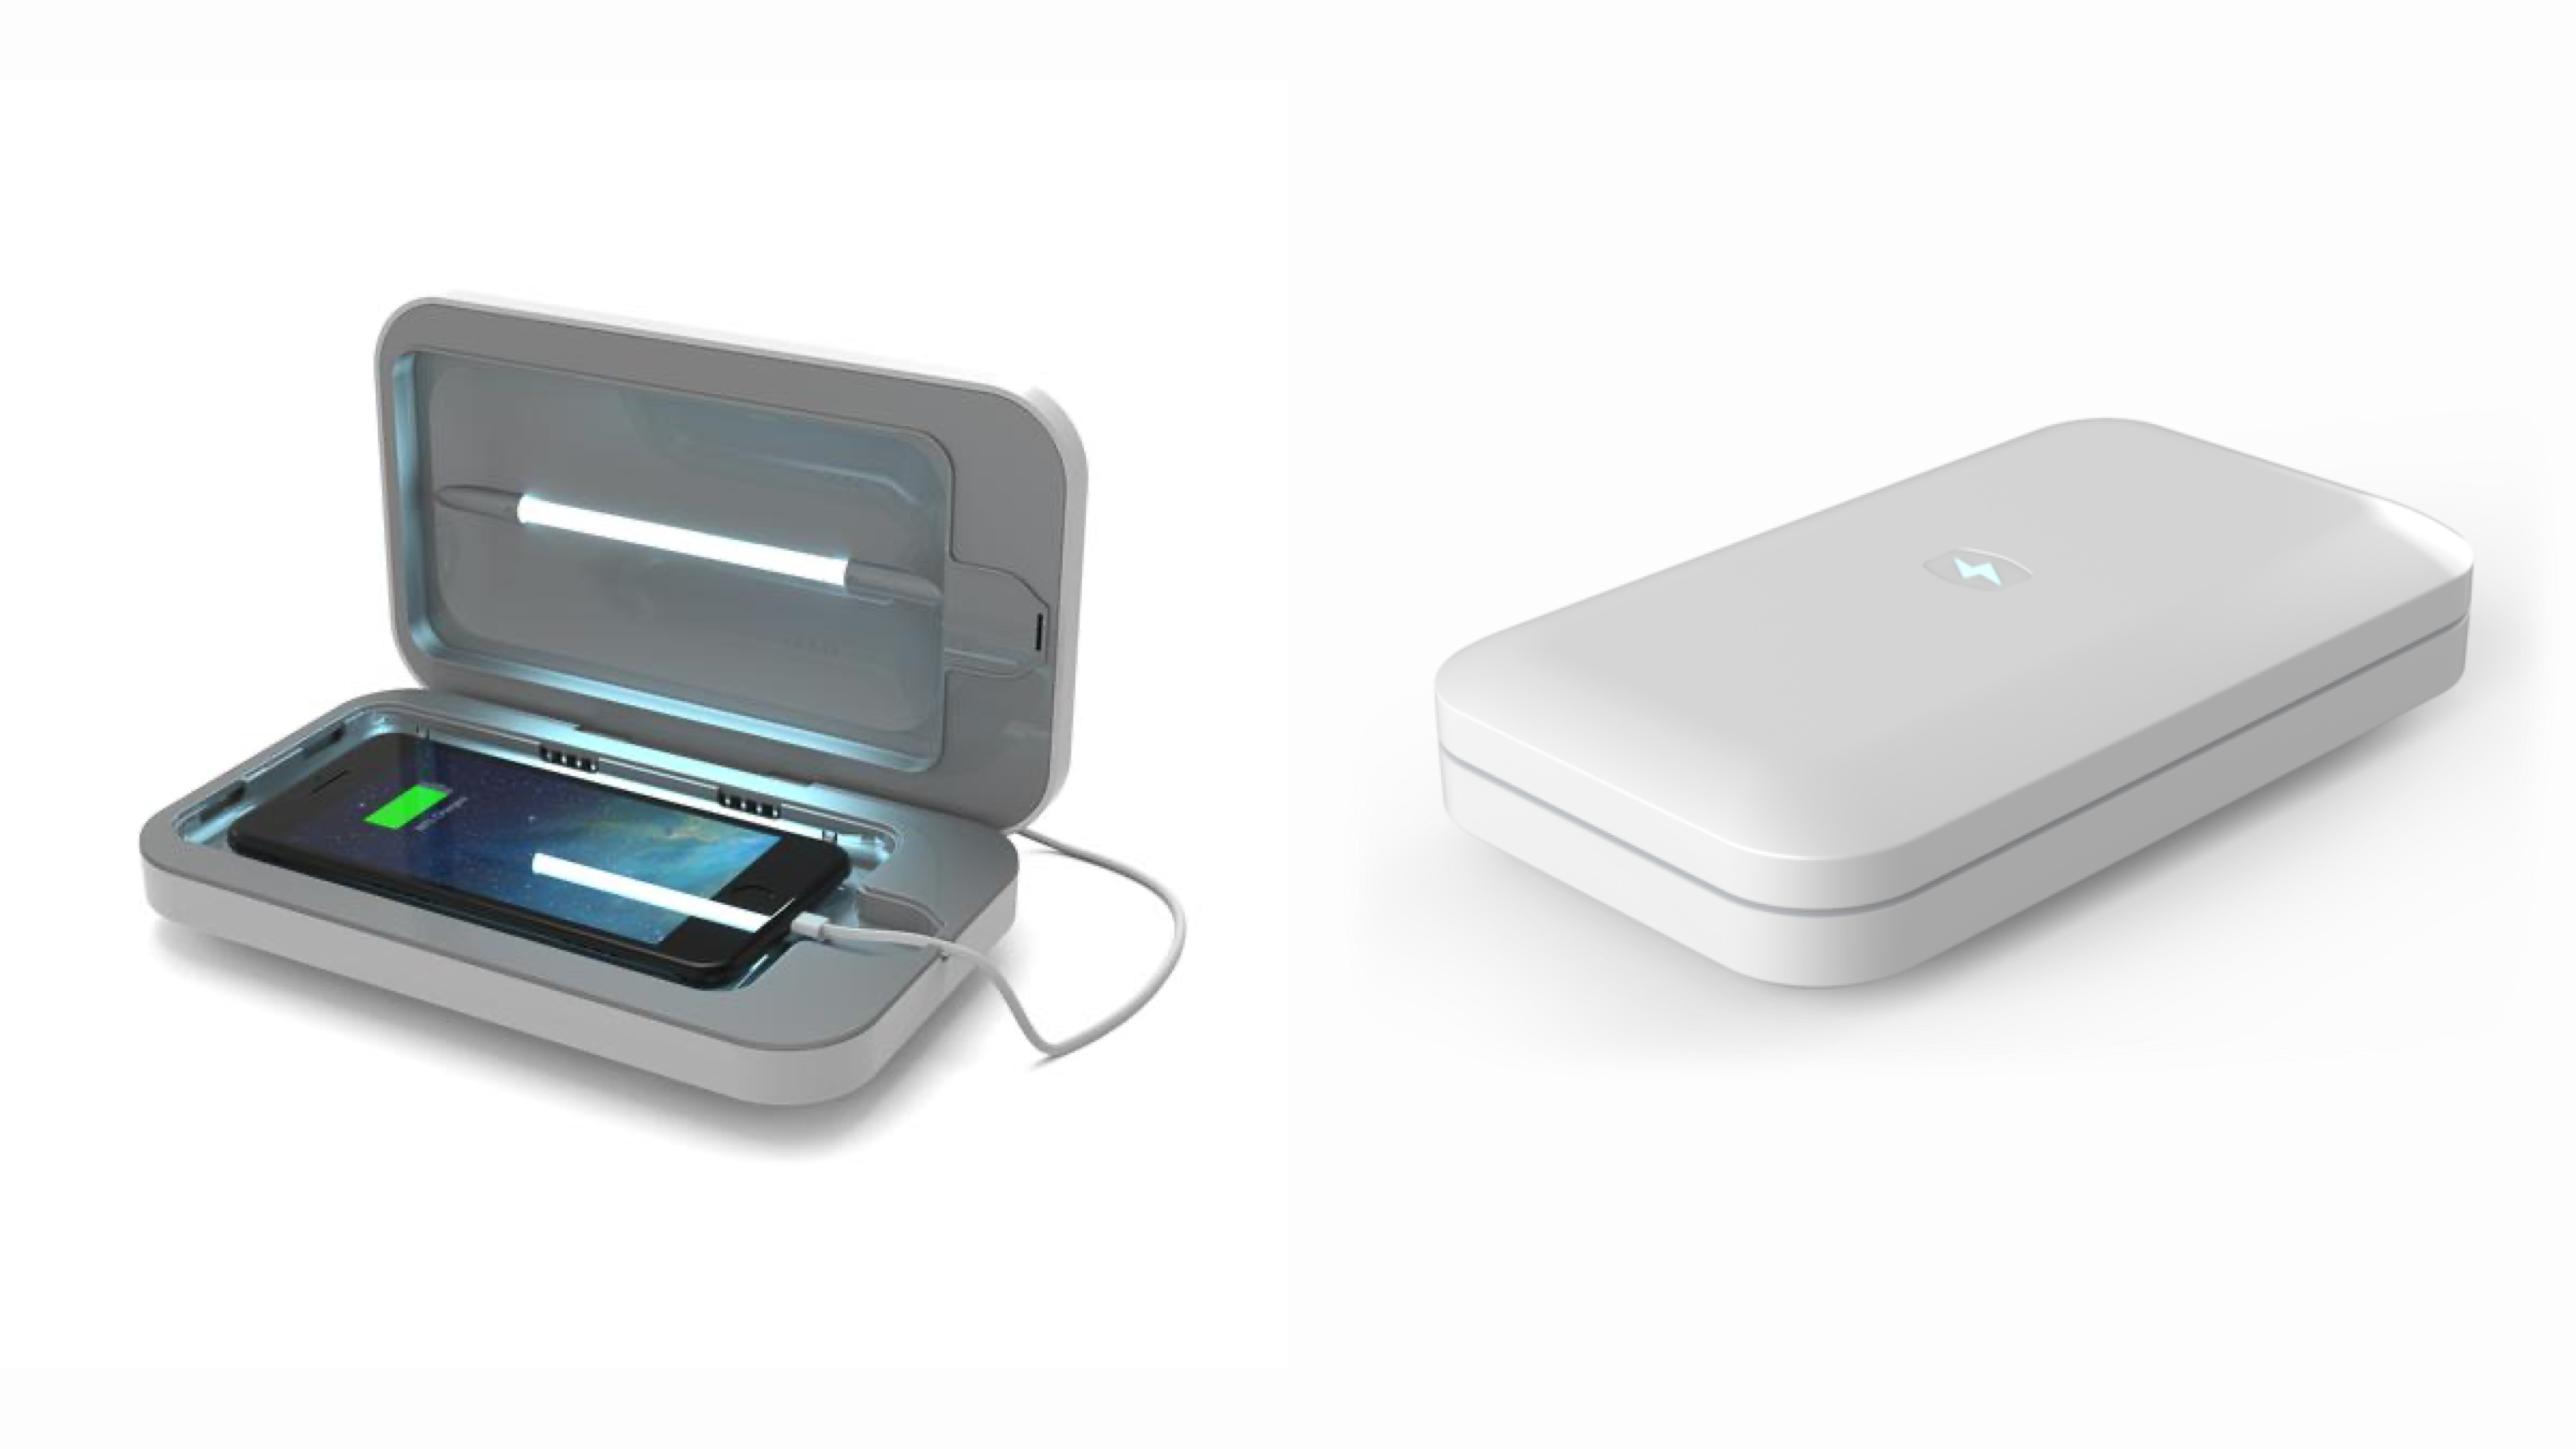 UV sanitizing tray for your phone